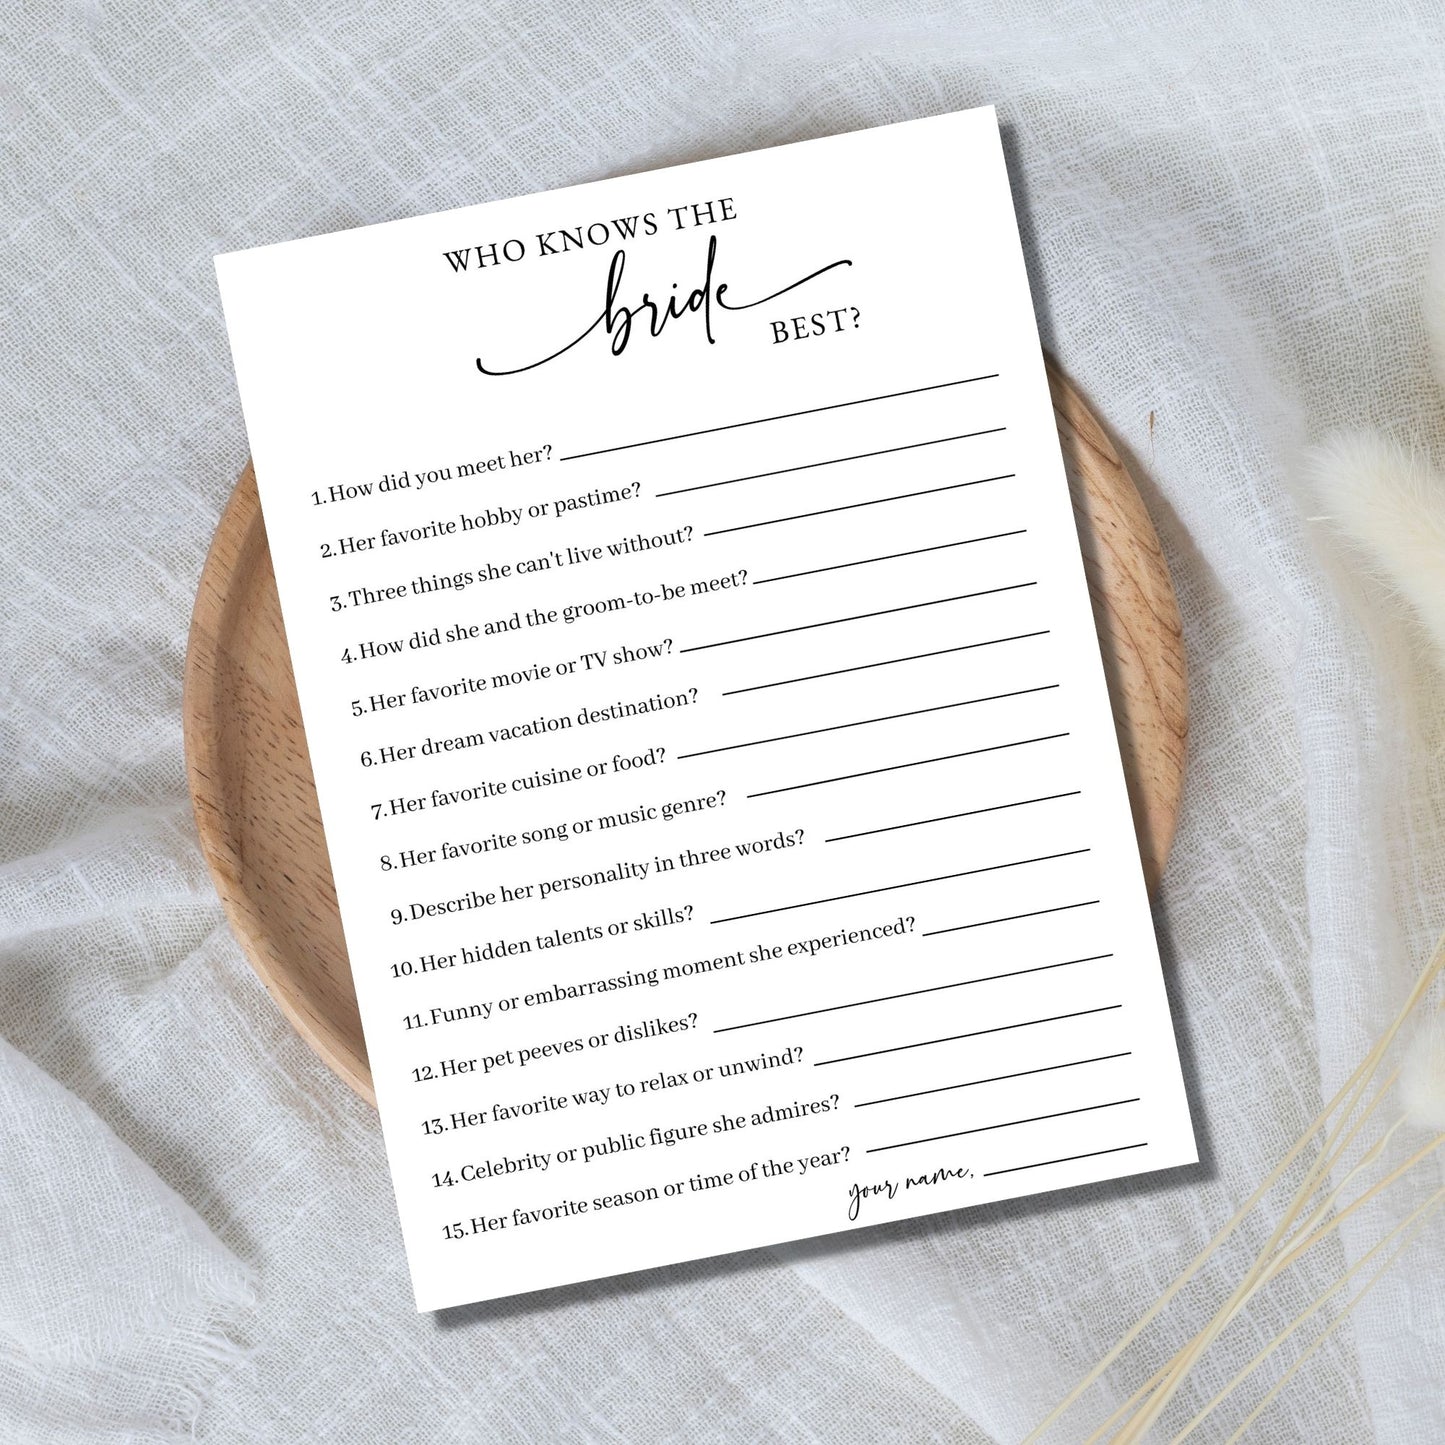 Who Knows the Bride Best Bridal Shower Game